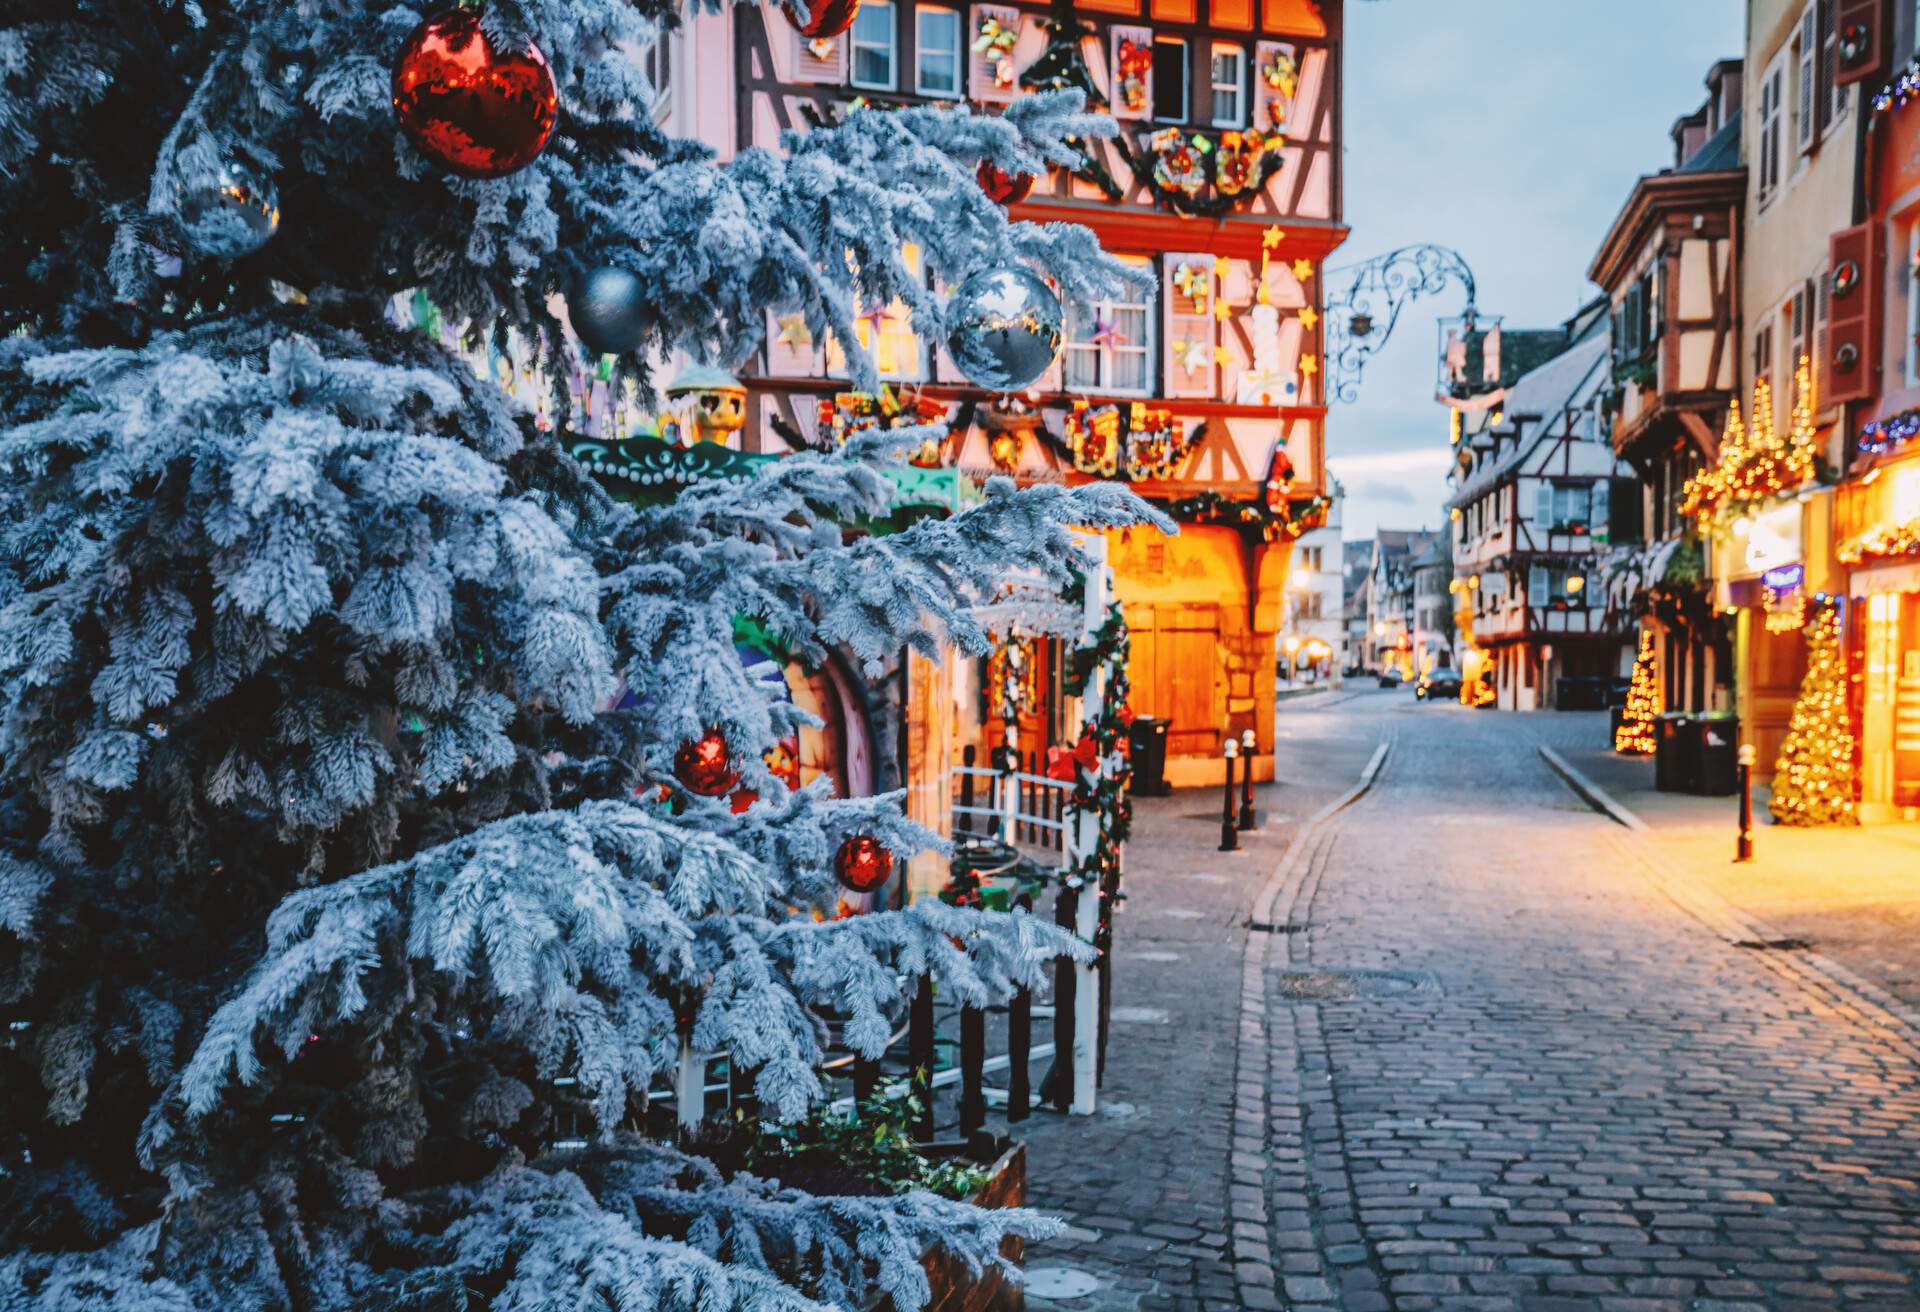 Old town decorate magical like a fairy tale in Noel festive season with detail of Christmas tree with red ball ornates at early morning time in Colmar, Alsace, France.